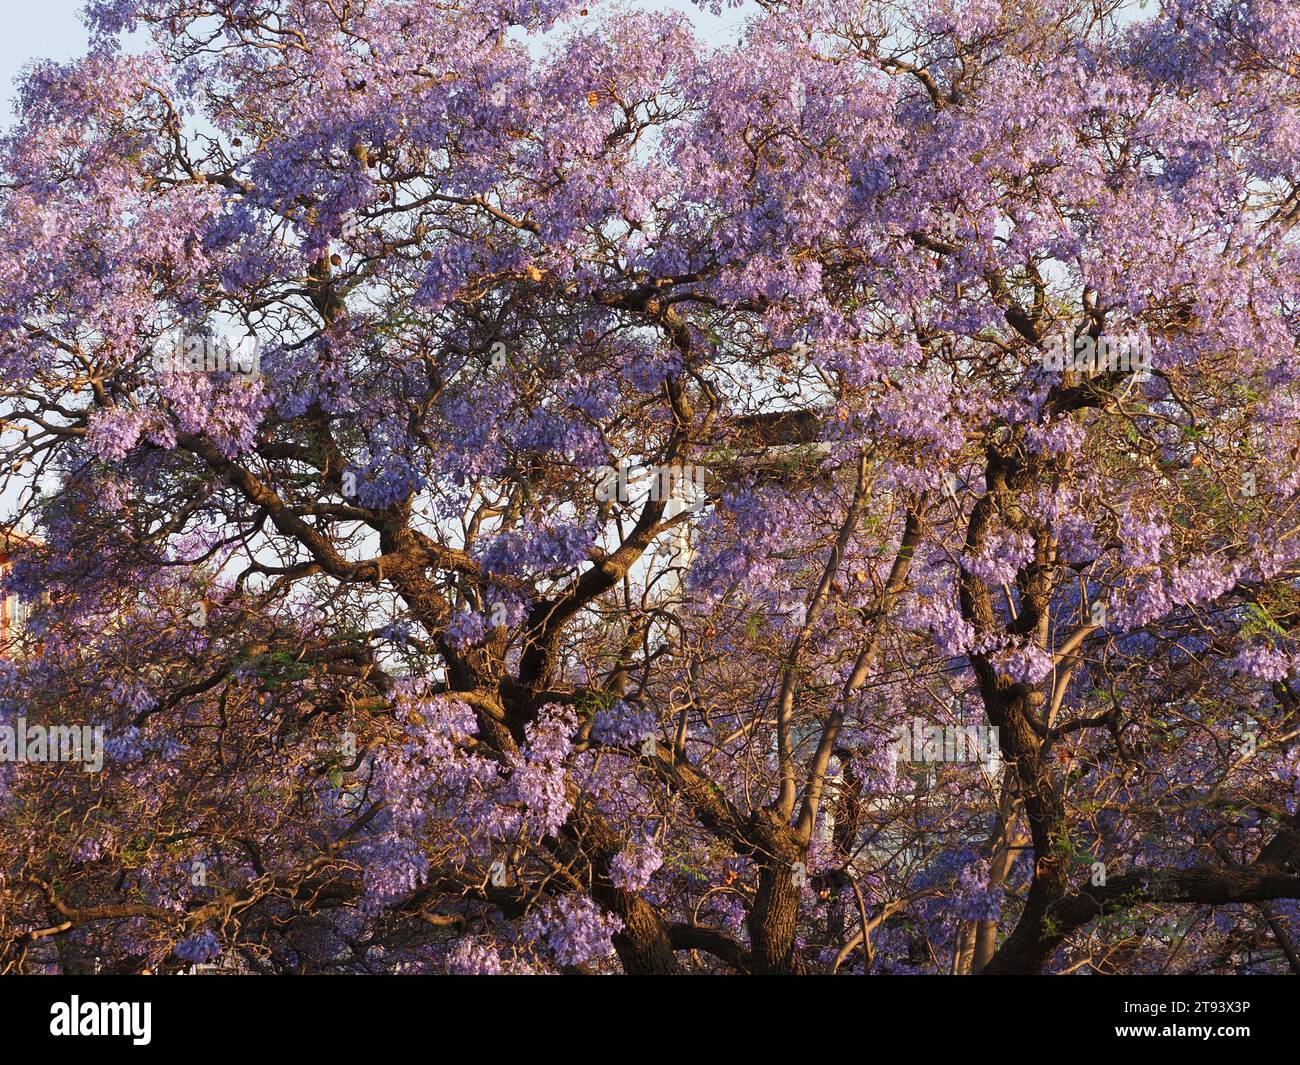 Pretoria is famous for it's jacaranda trees that turn the city purple in spring. Pretoria, Gauteng, South Africa Stock Photo